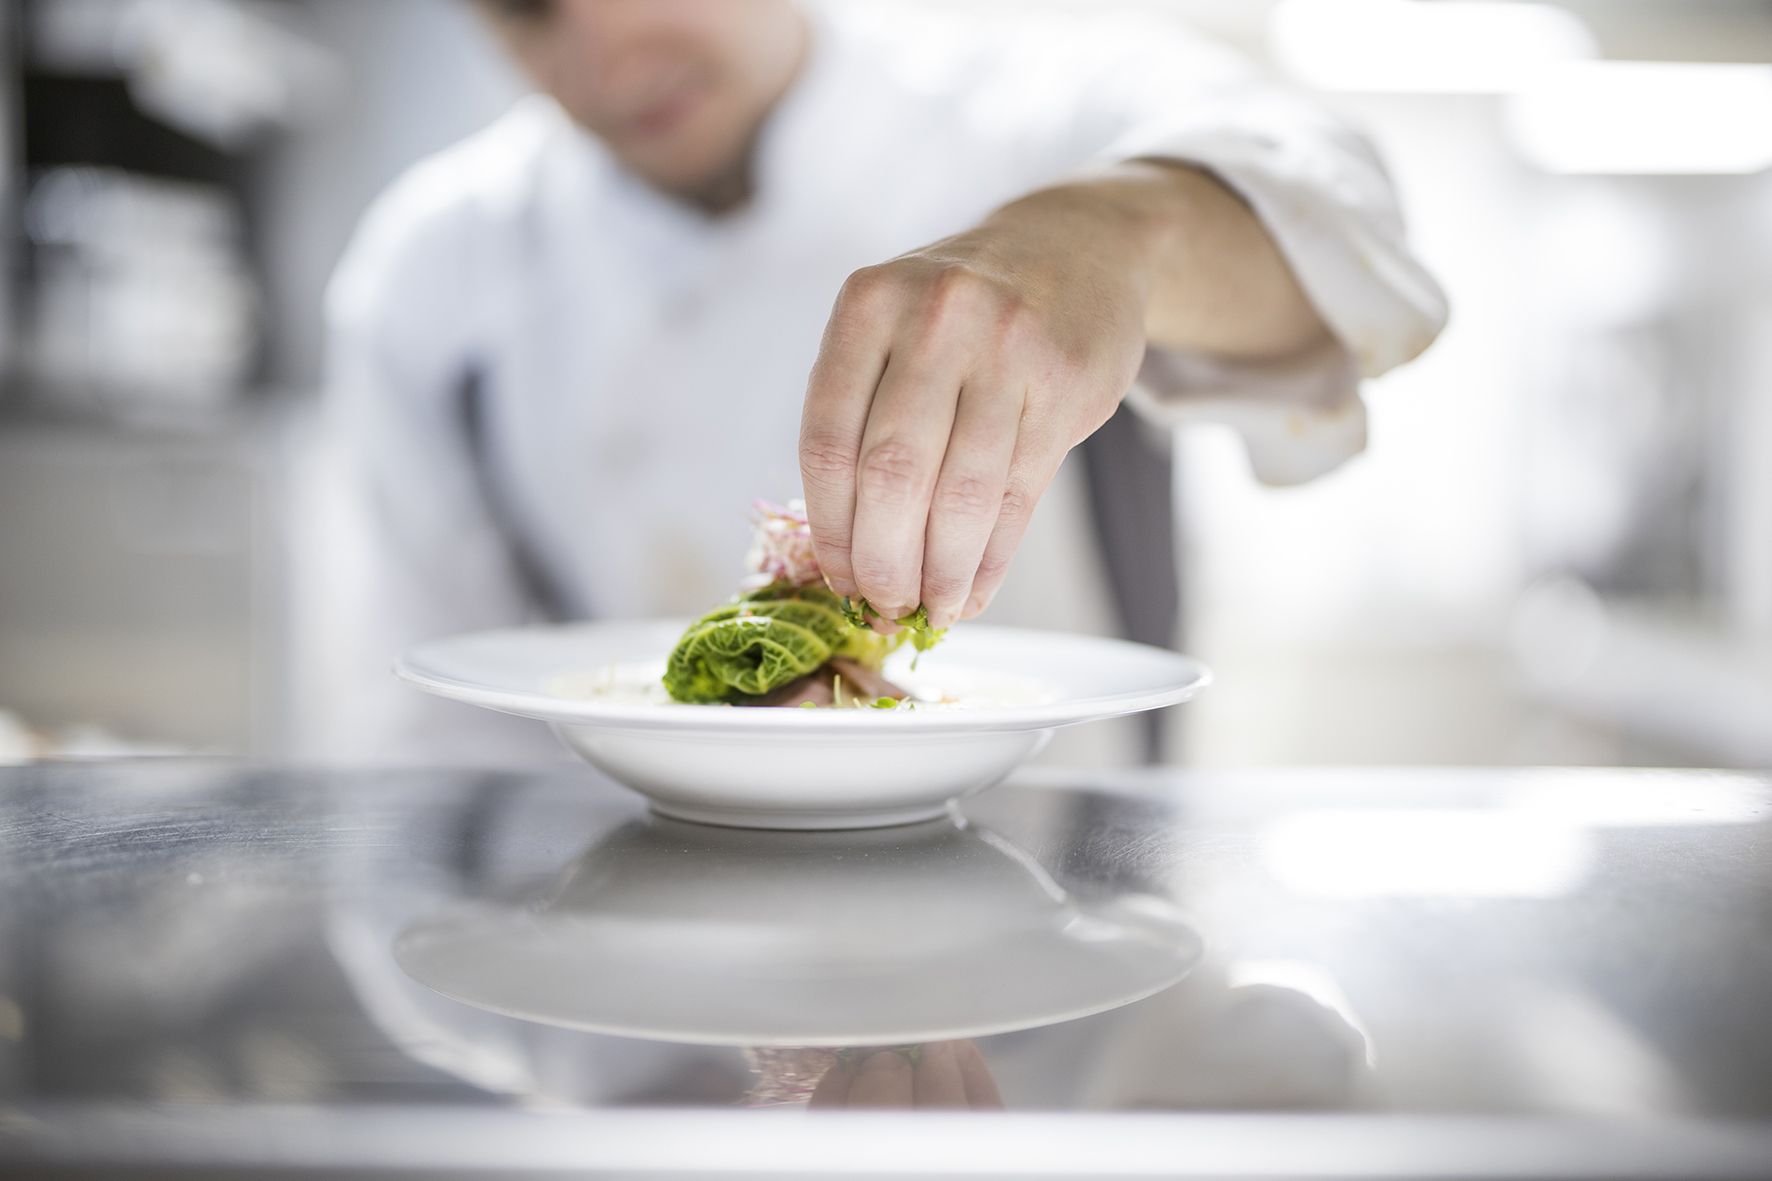 A chef sprinkles herbs over an arranged dish in a round plate.